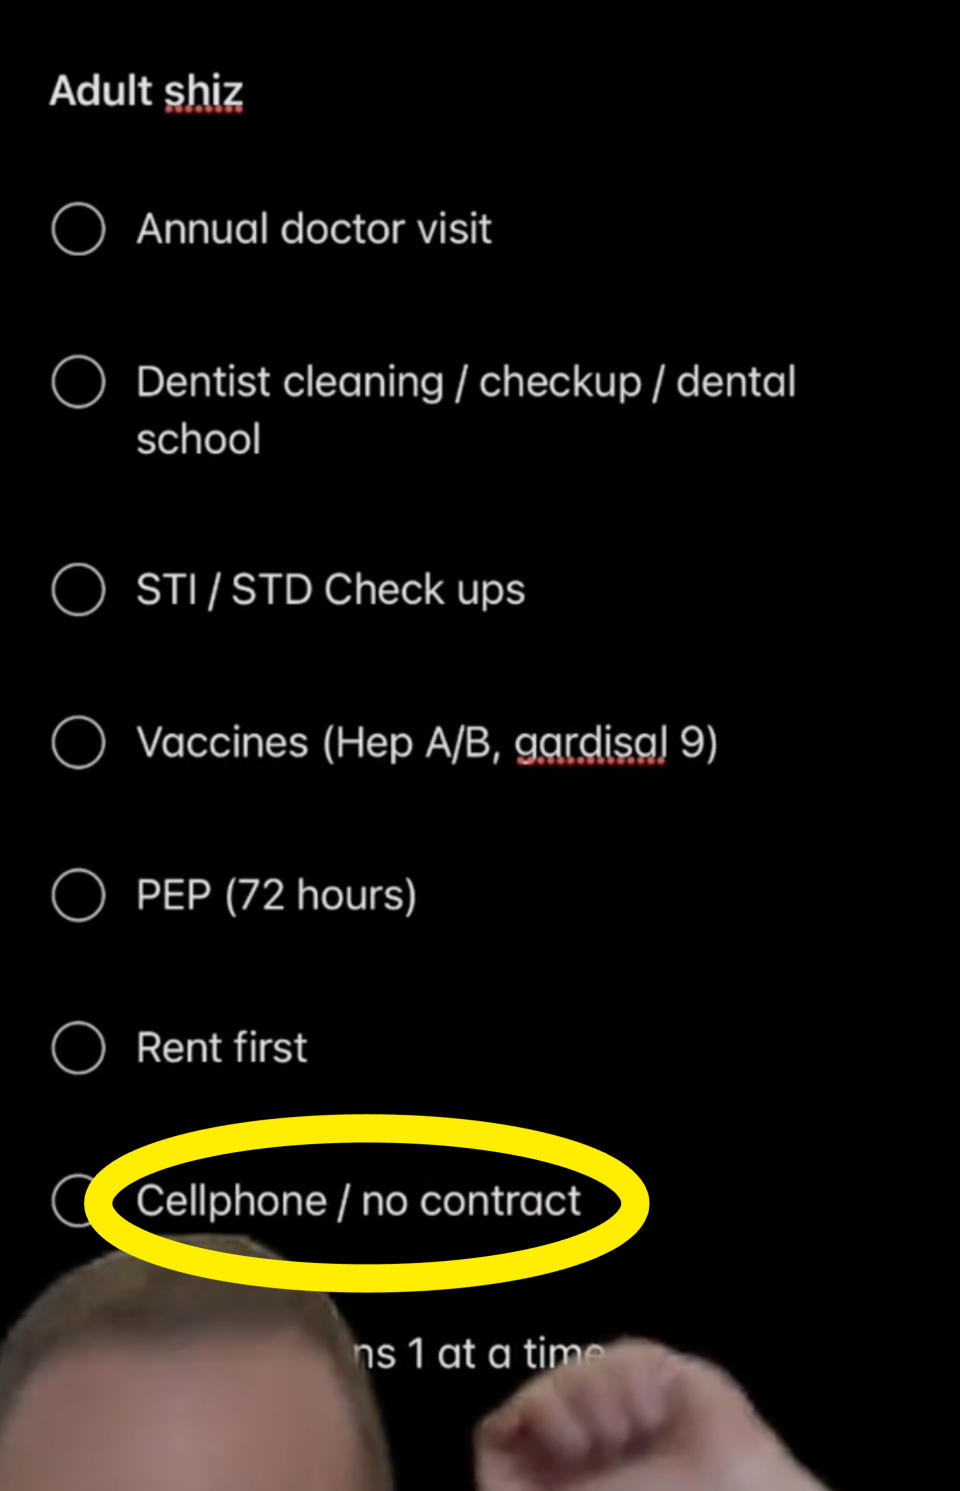 John's list and "Cellphone / no contract" is circled